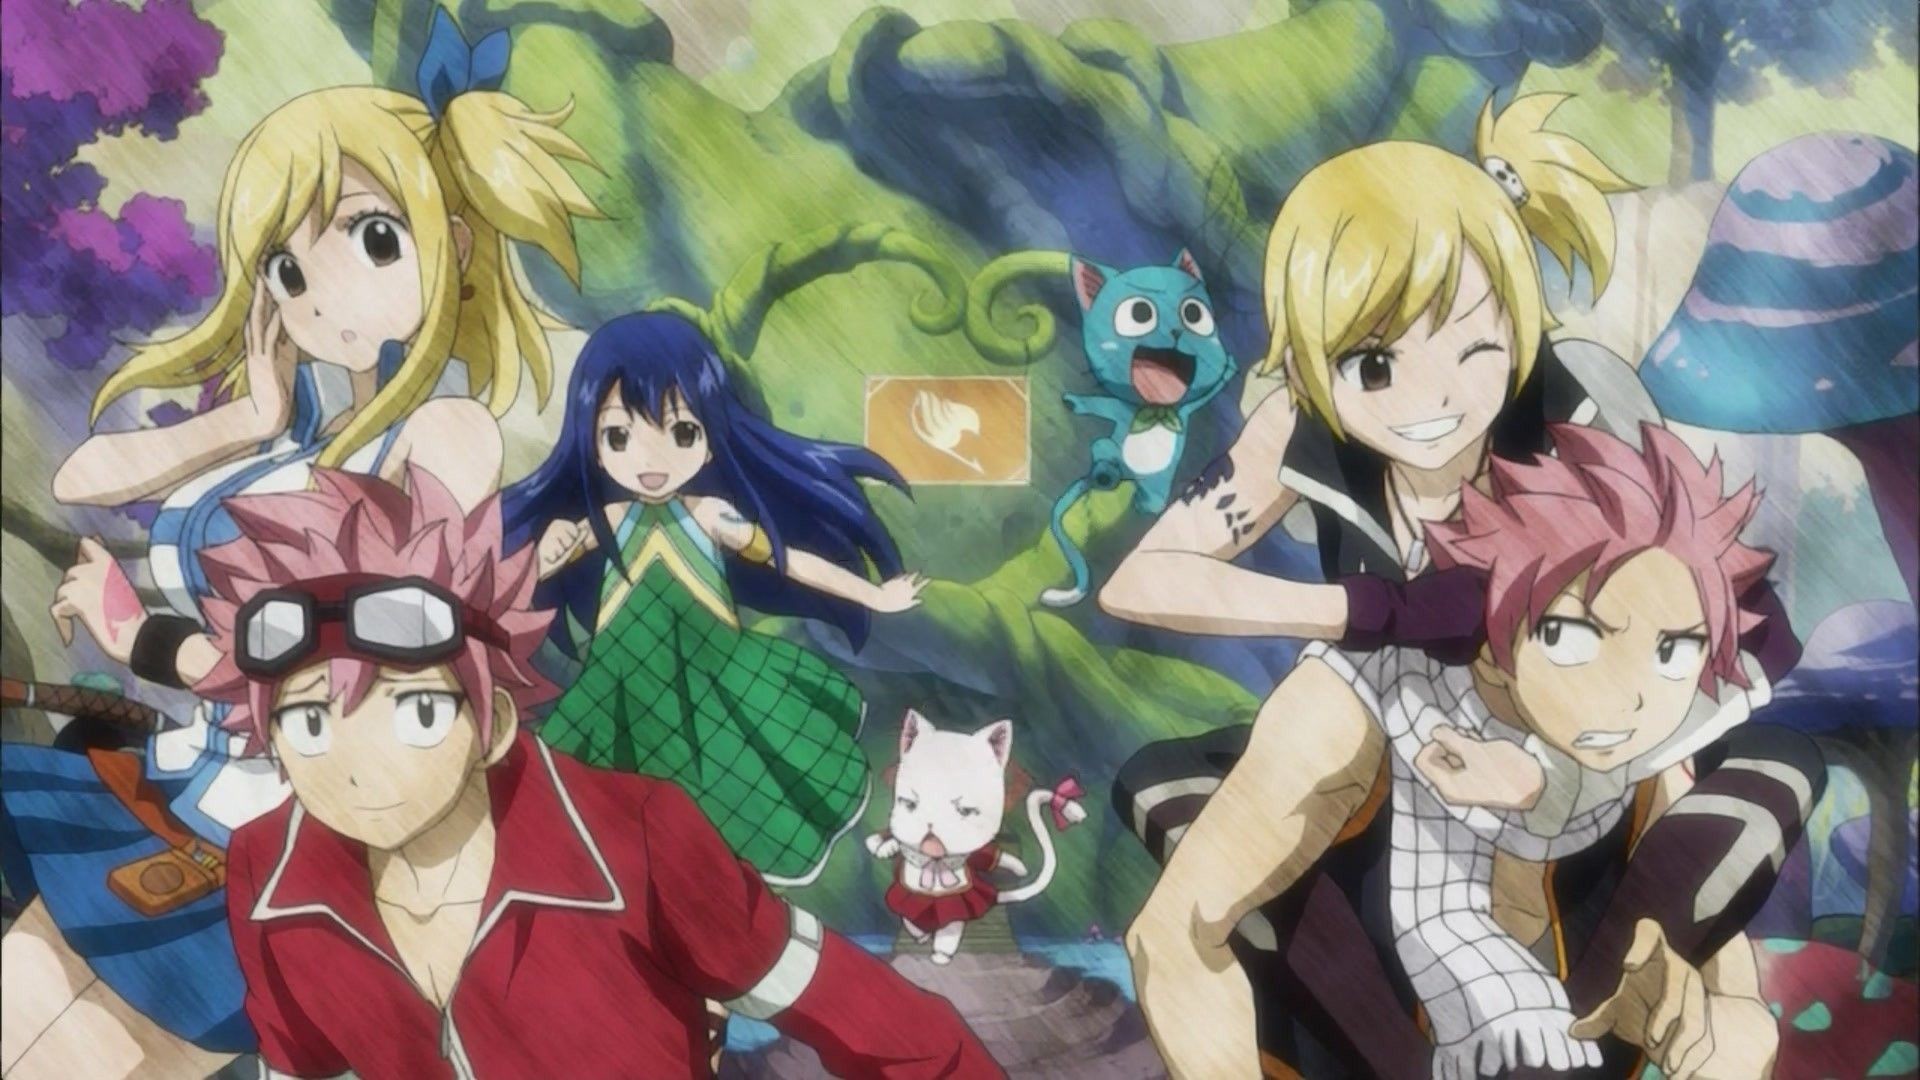 1920x1080  High Resolution Best Anime Fairy Tail Wallpaper HD 10 Full Size .